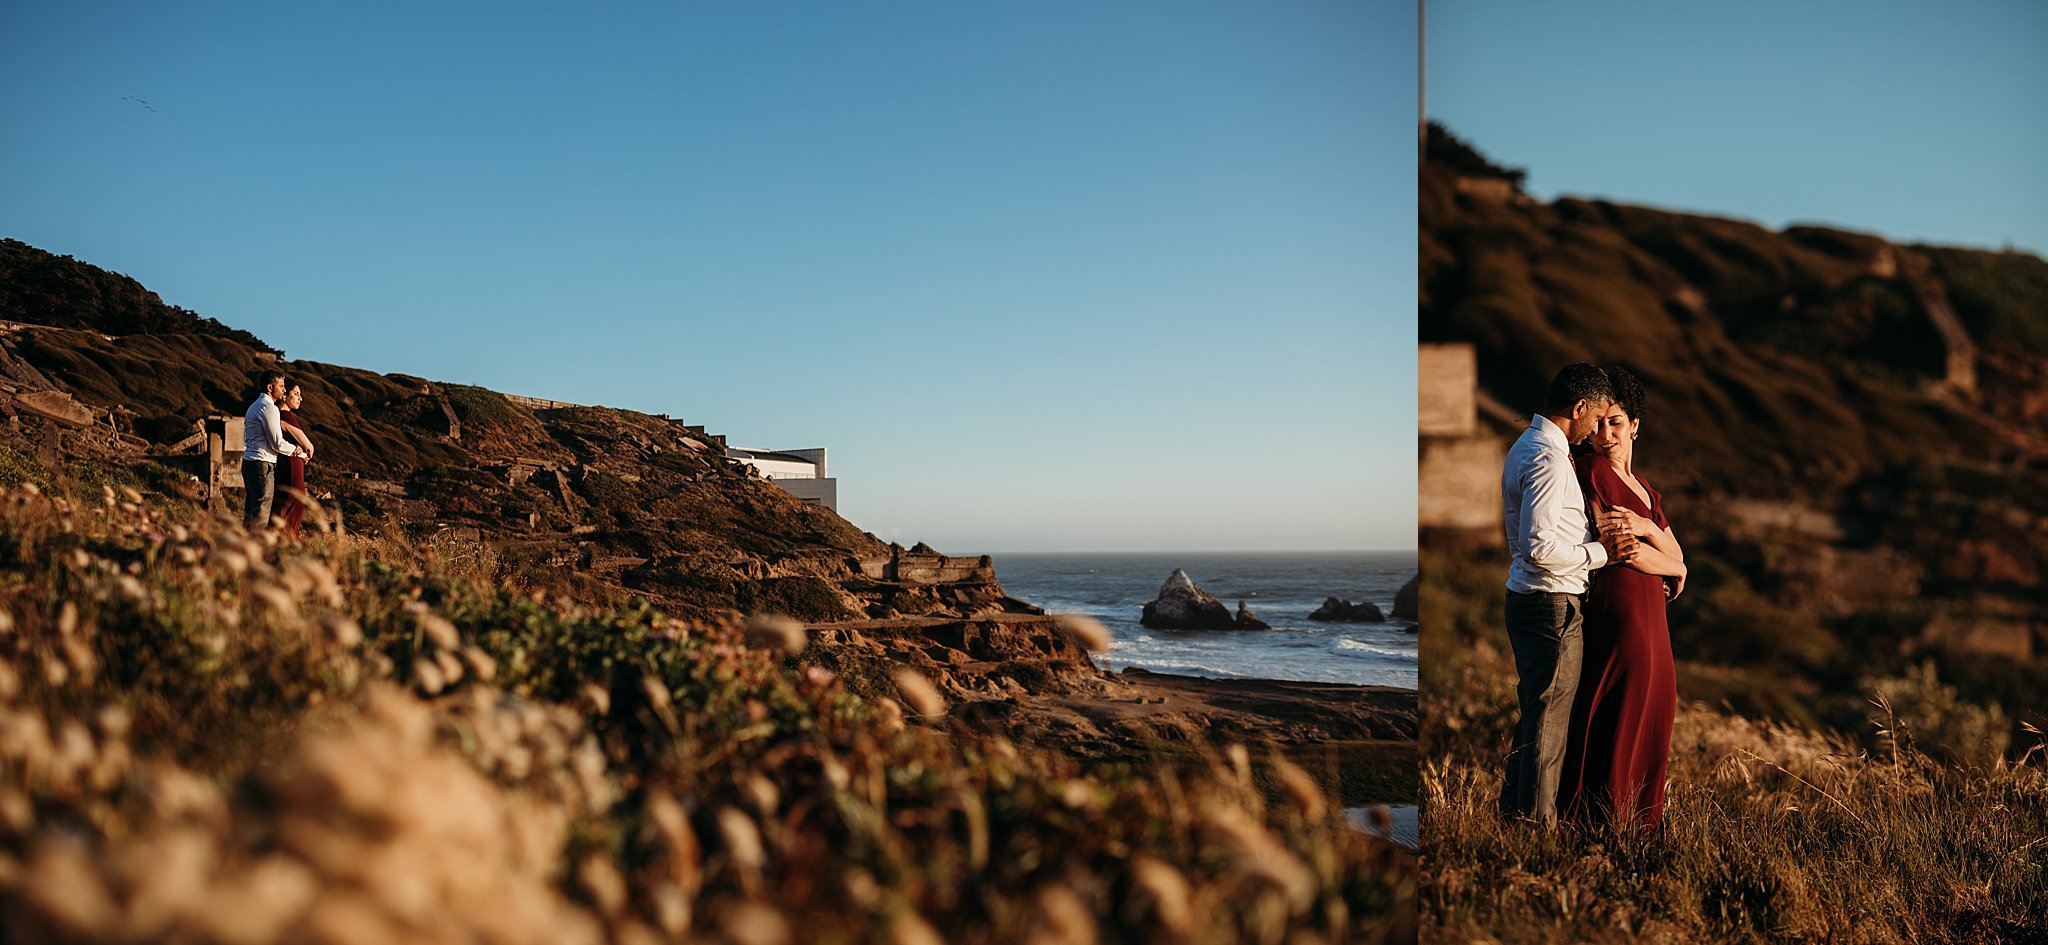 Two images of couple on their engagement photoshoot at Sutro Baths standing in the coastal brush overlooking the Pacific Ocean